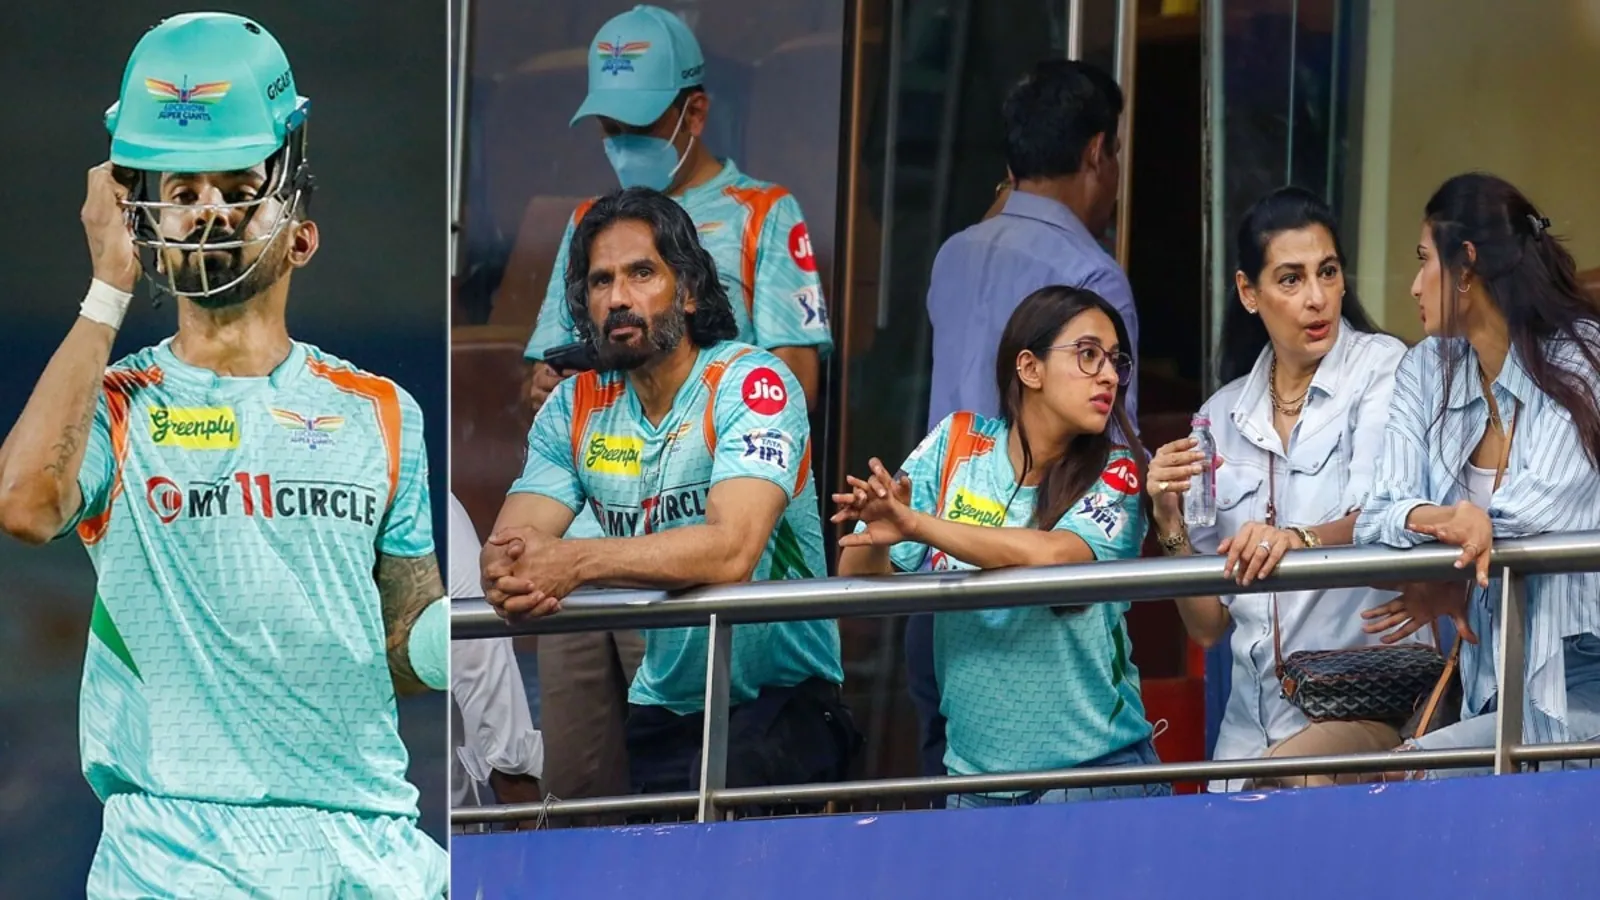 Athiya Shetty, Suniel Shetty cheer for her boyfriend KL Rahul at his IPL match at Wankhede Stadium. See pics